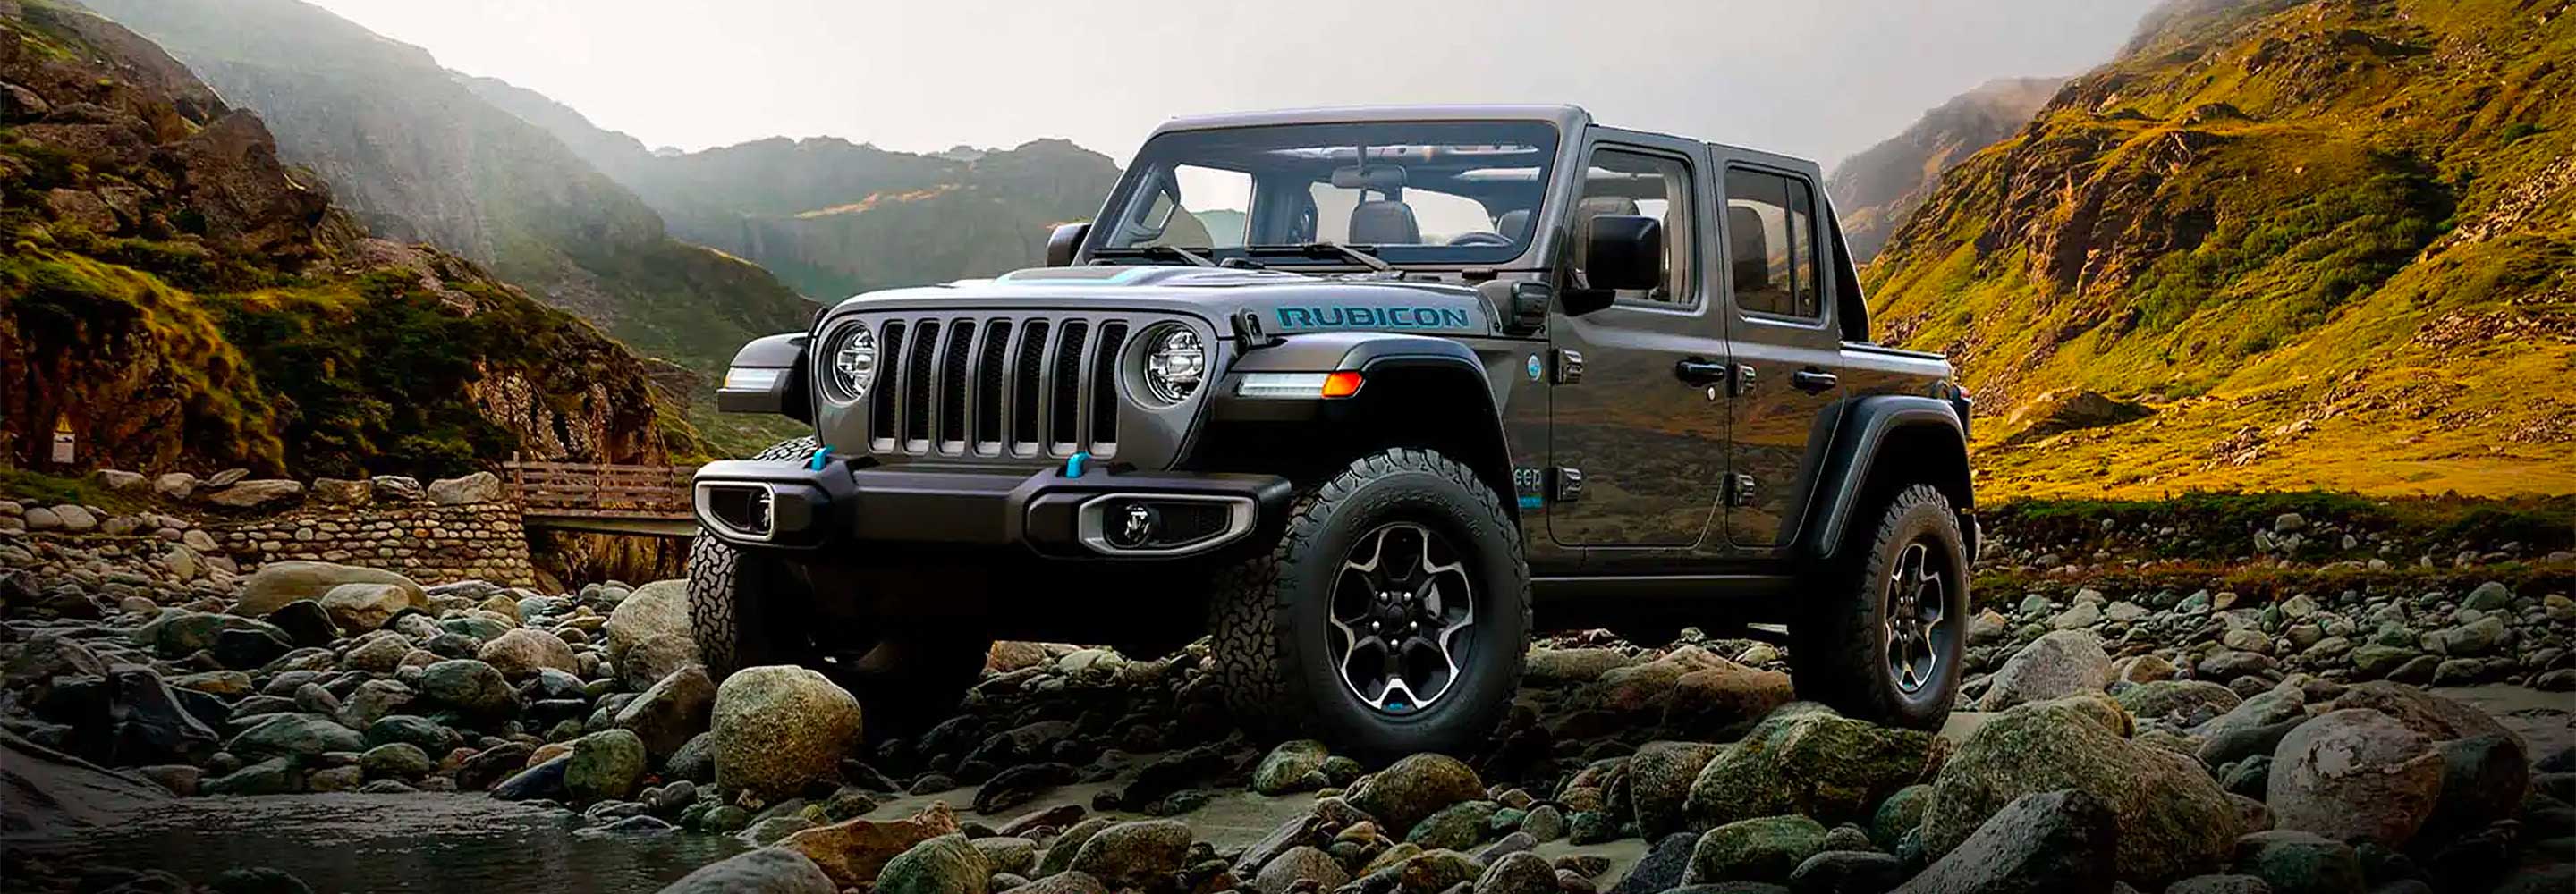 All-Electric Jeep Wrangler 4xe Awarded for Sustainability by Women Journalists